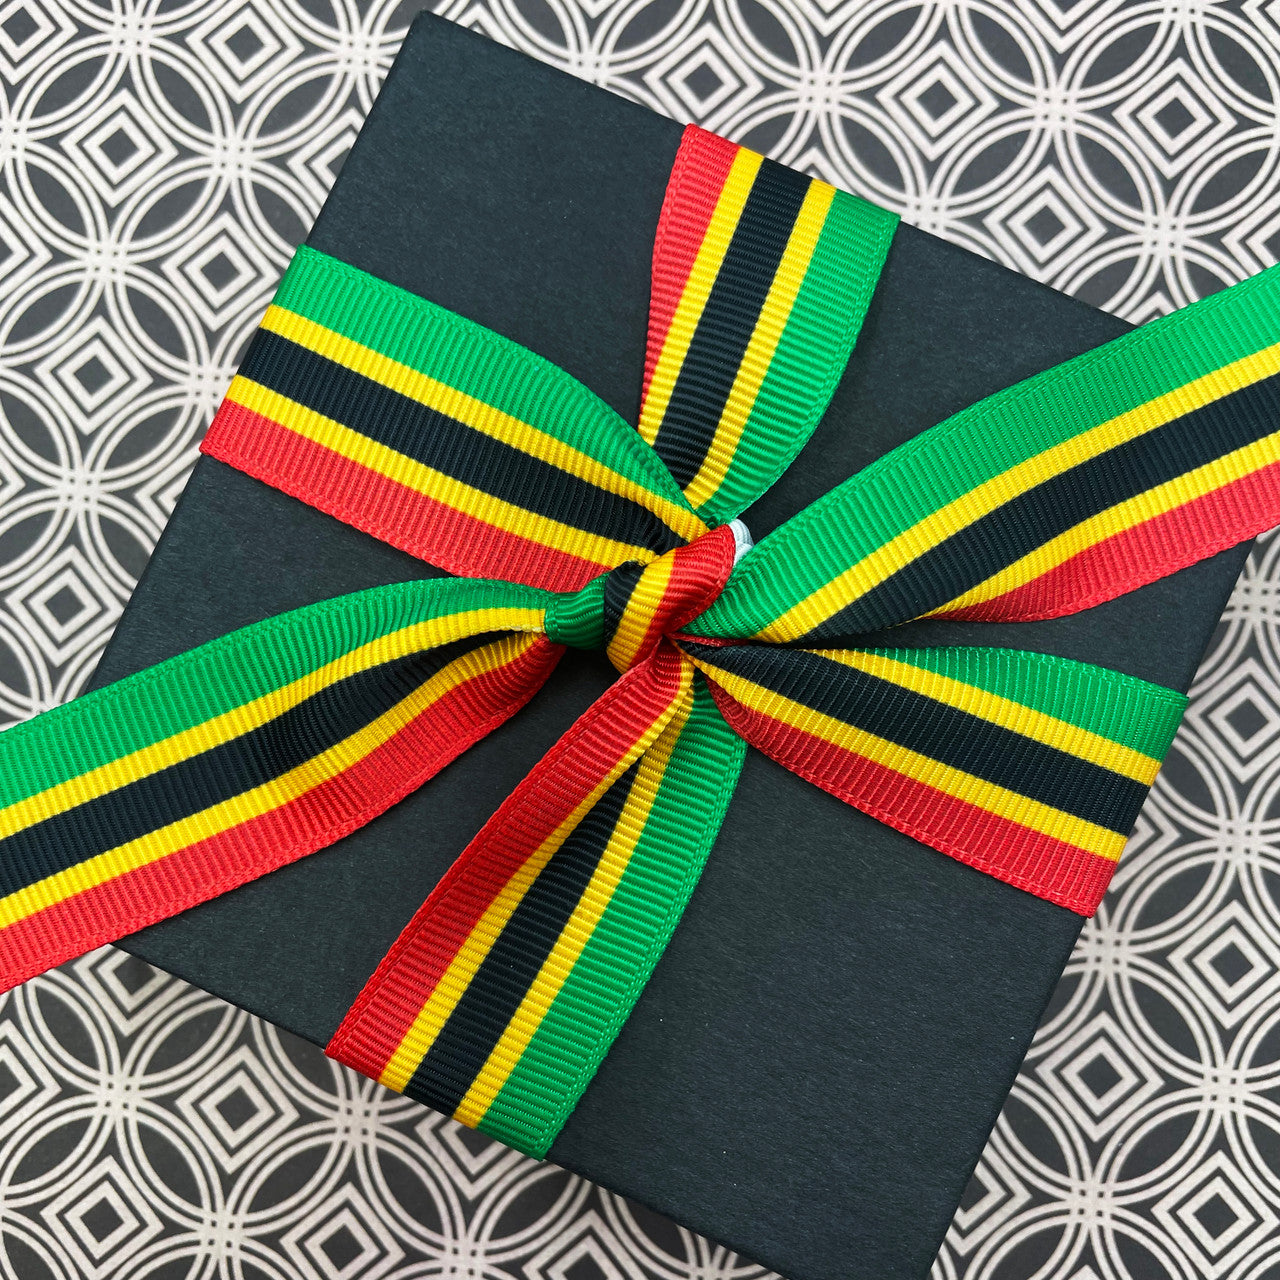 Our high quality Pan African grosgrain ribbon ties a lovely bow for gift giving too! 